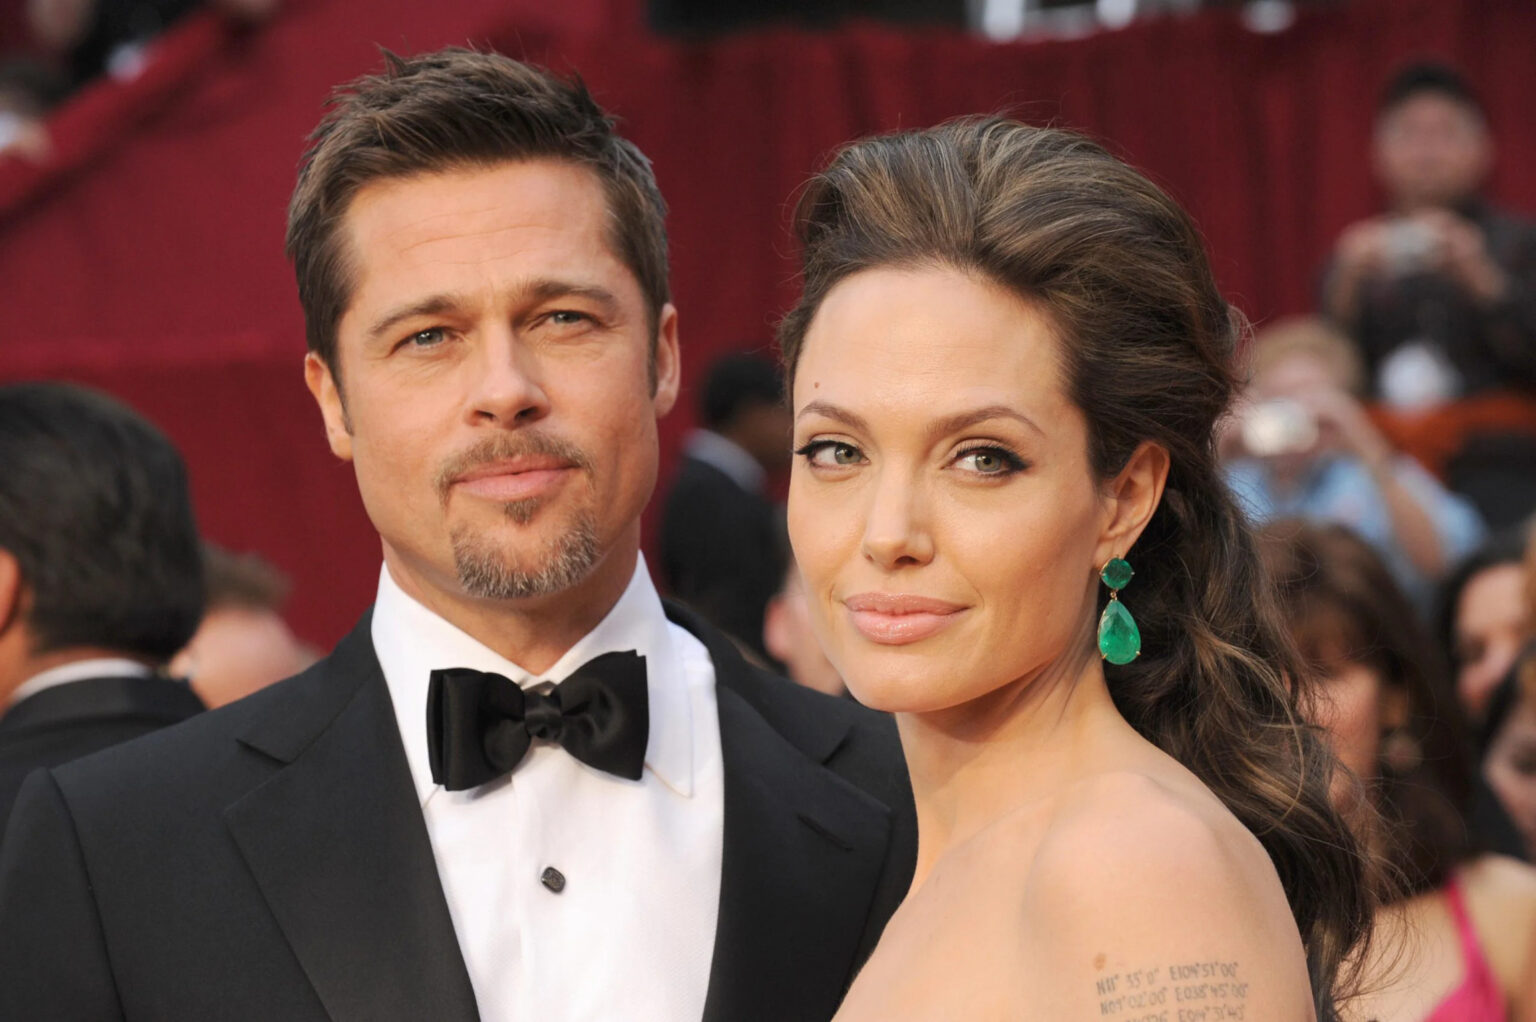 How long will Brad Pitt and Angelina Jolie be stuck in divorce court? Peek at how the case is draining their net worth and how much they could lose.